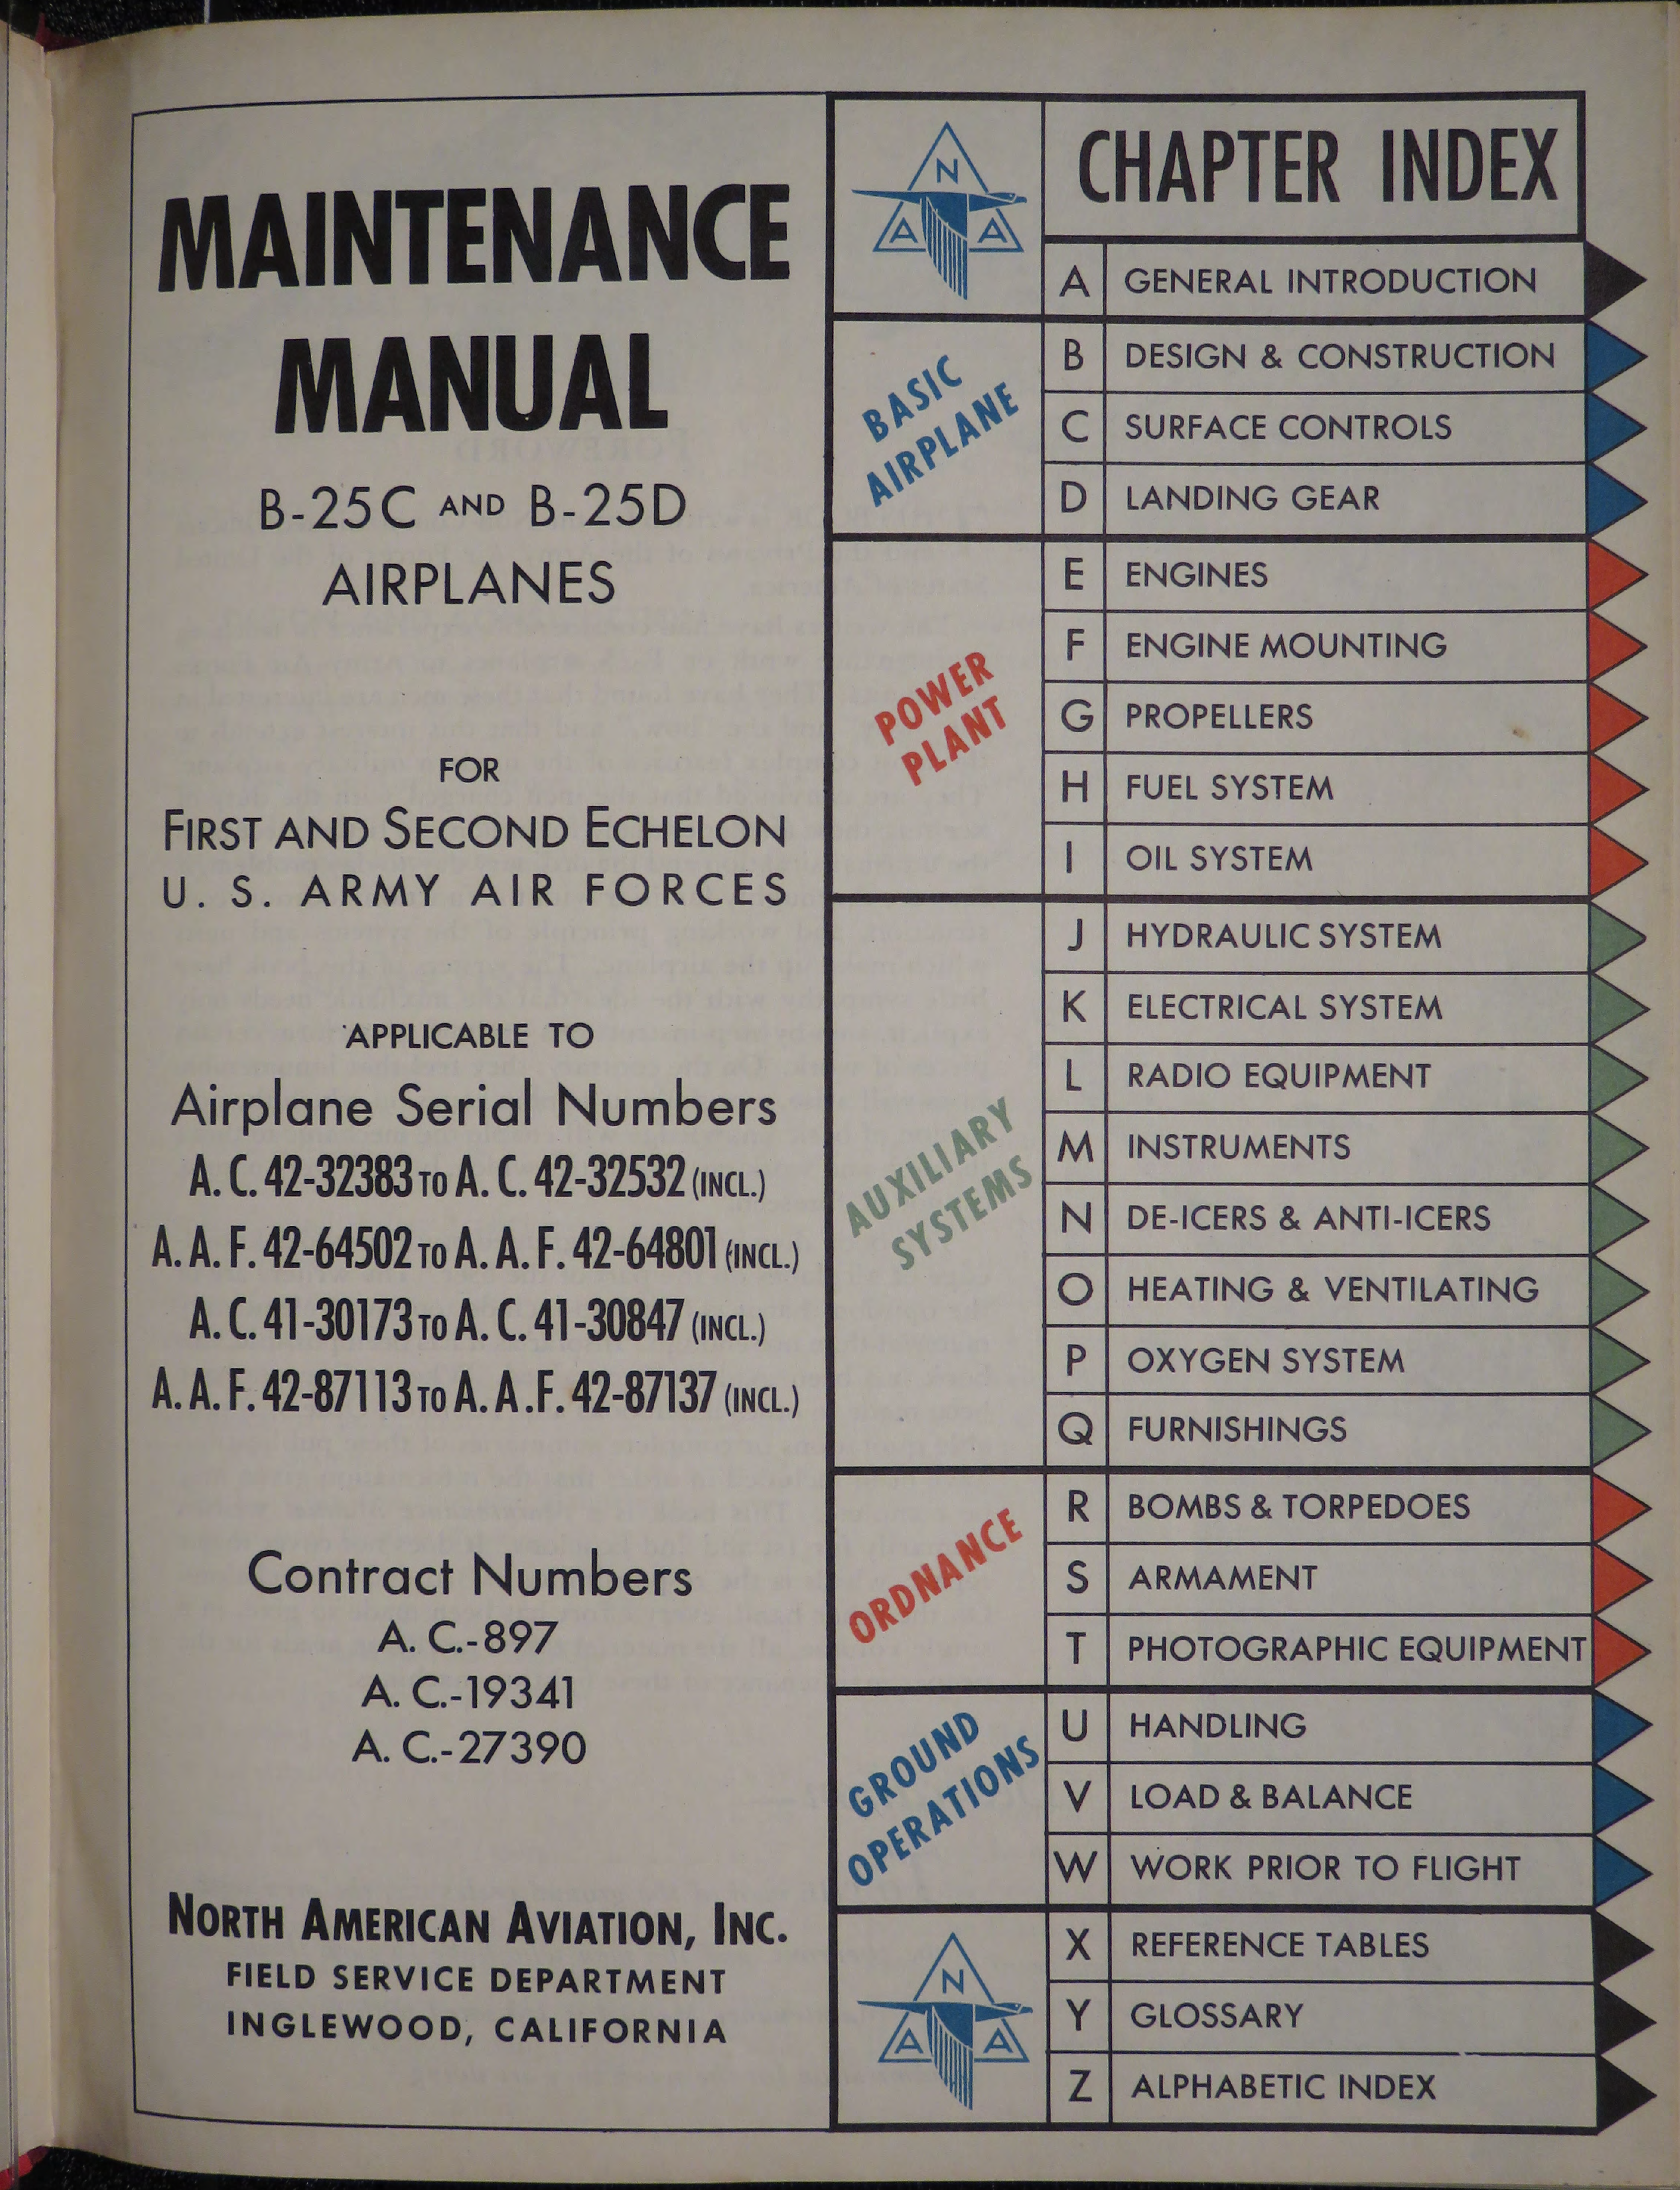 Sample page 5 from AirCorps Library document: Maintenance Manual for B-25C and B-25D (Part 1)